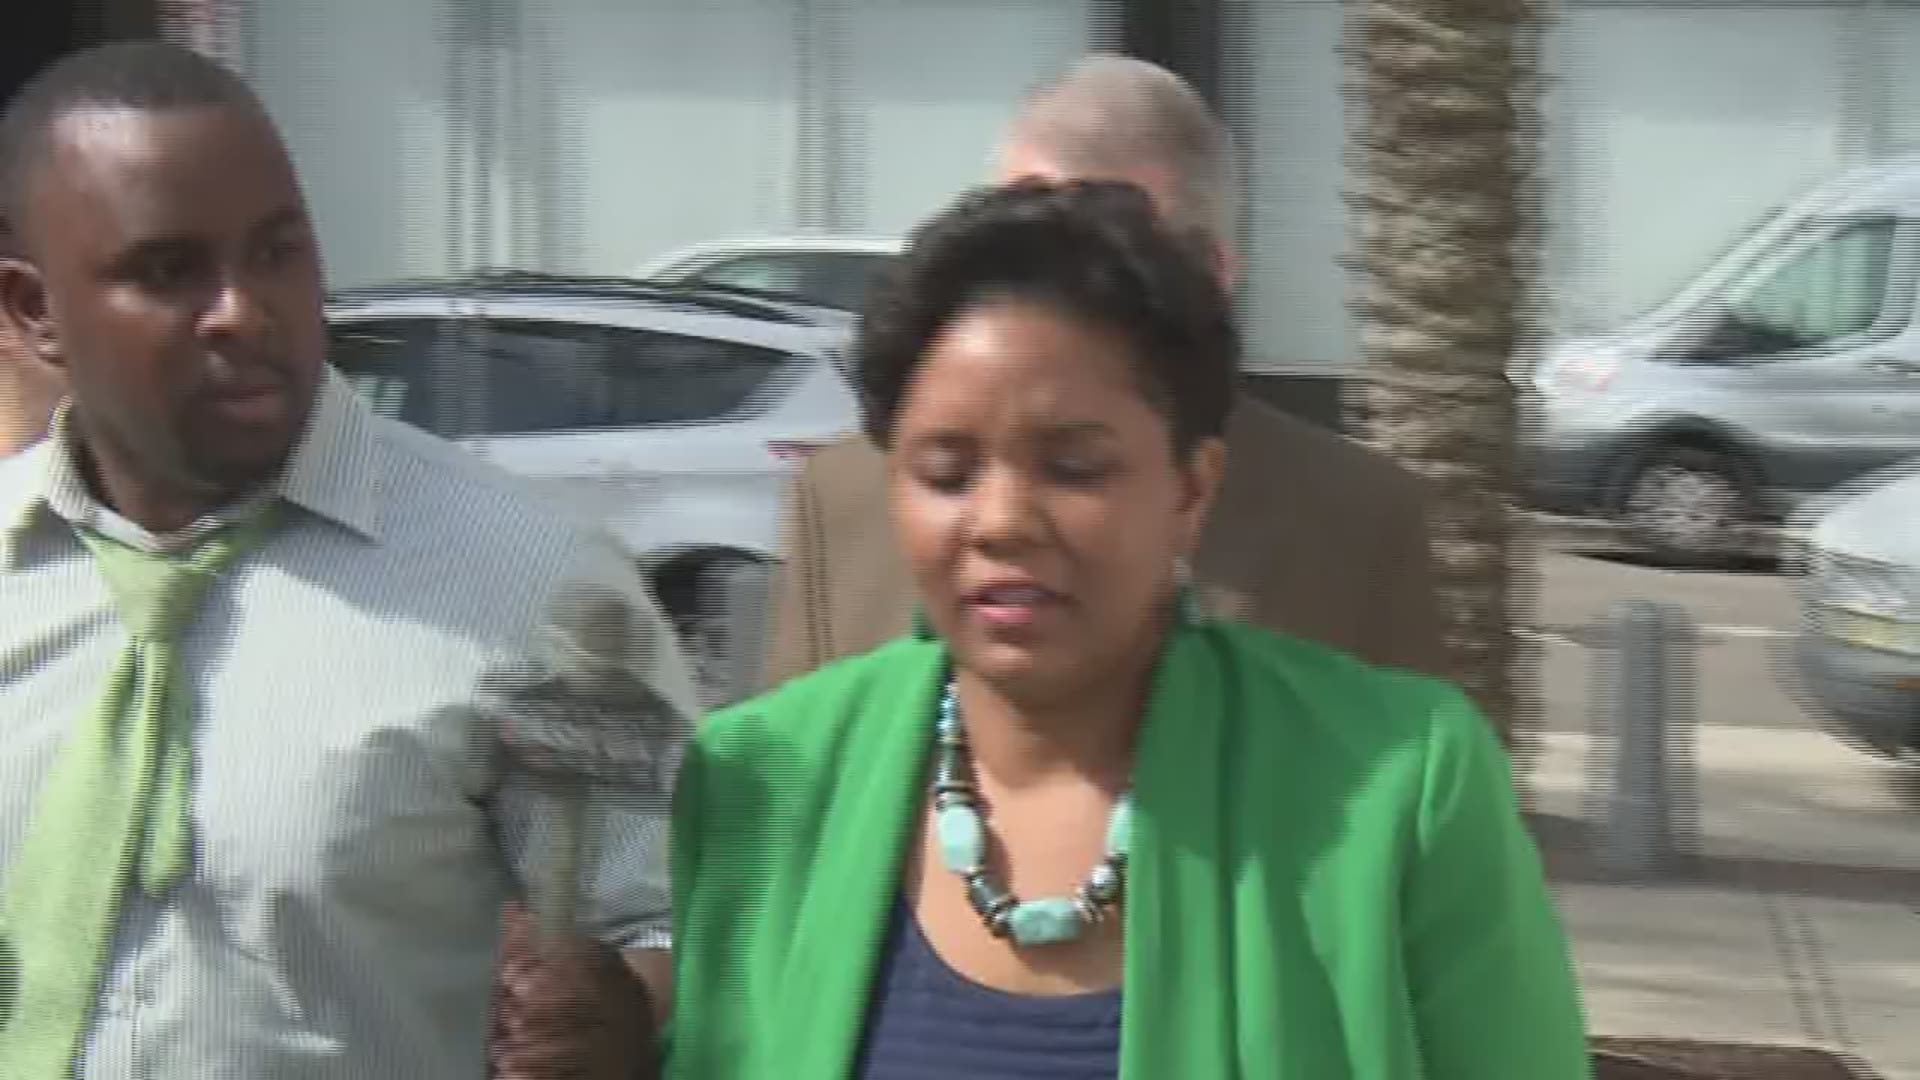 RAW VIDEO: Indicted City Councilmembers Katrina and Reggie Brown walk into the courthouse prior to their status hearing.